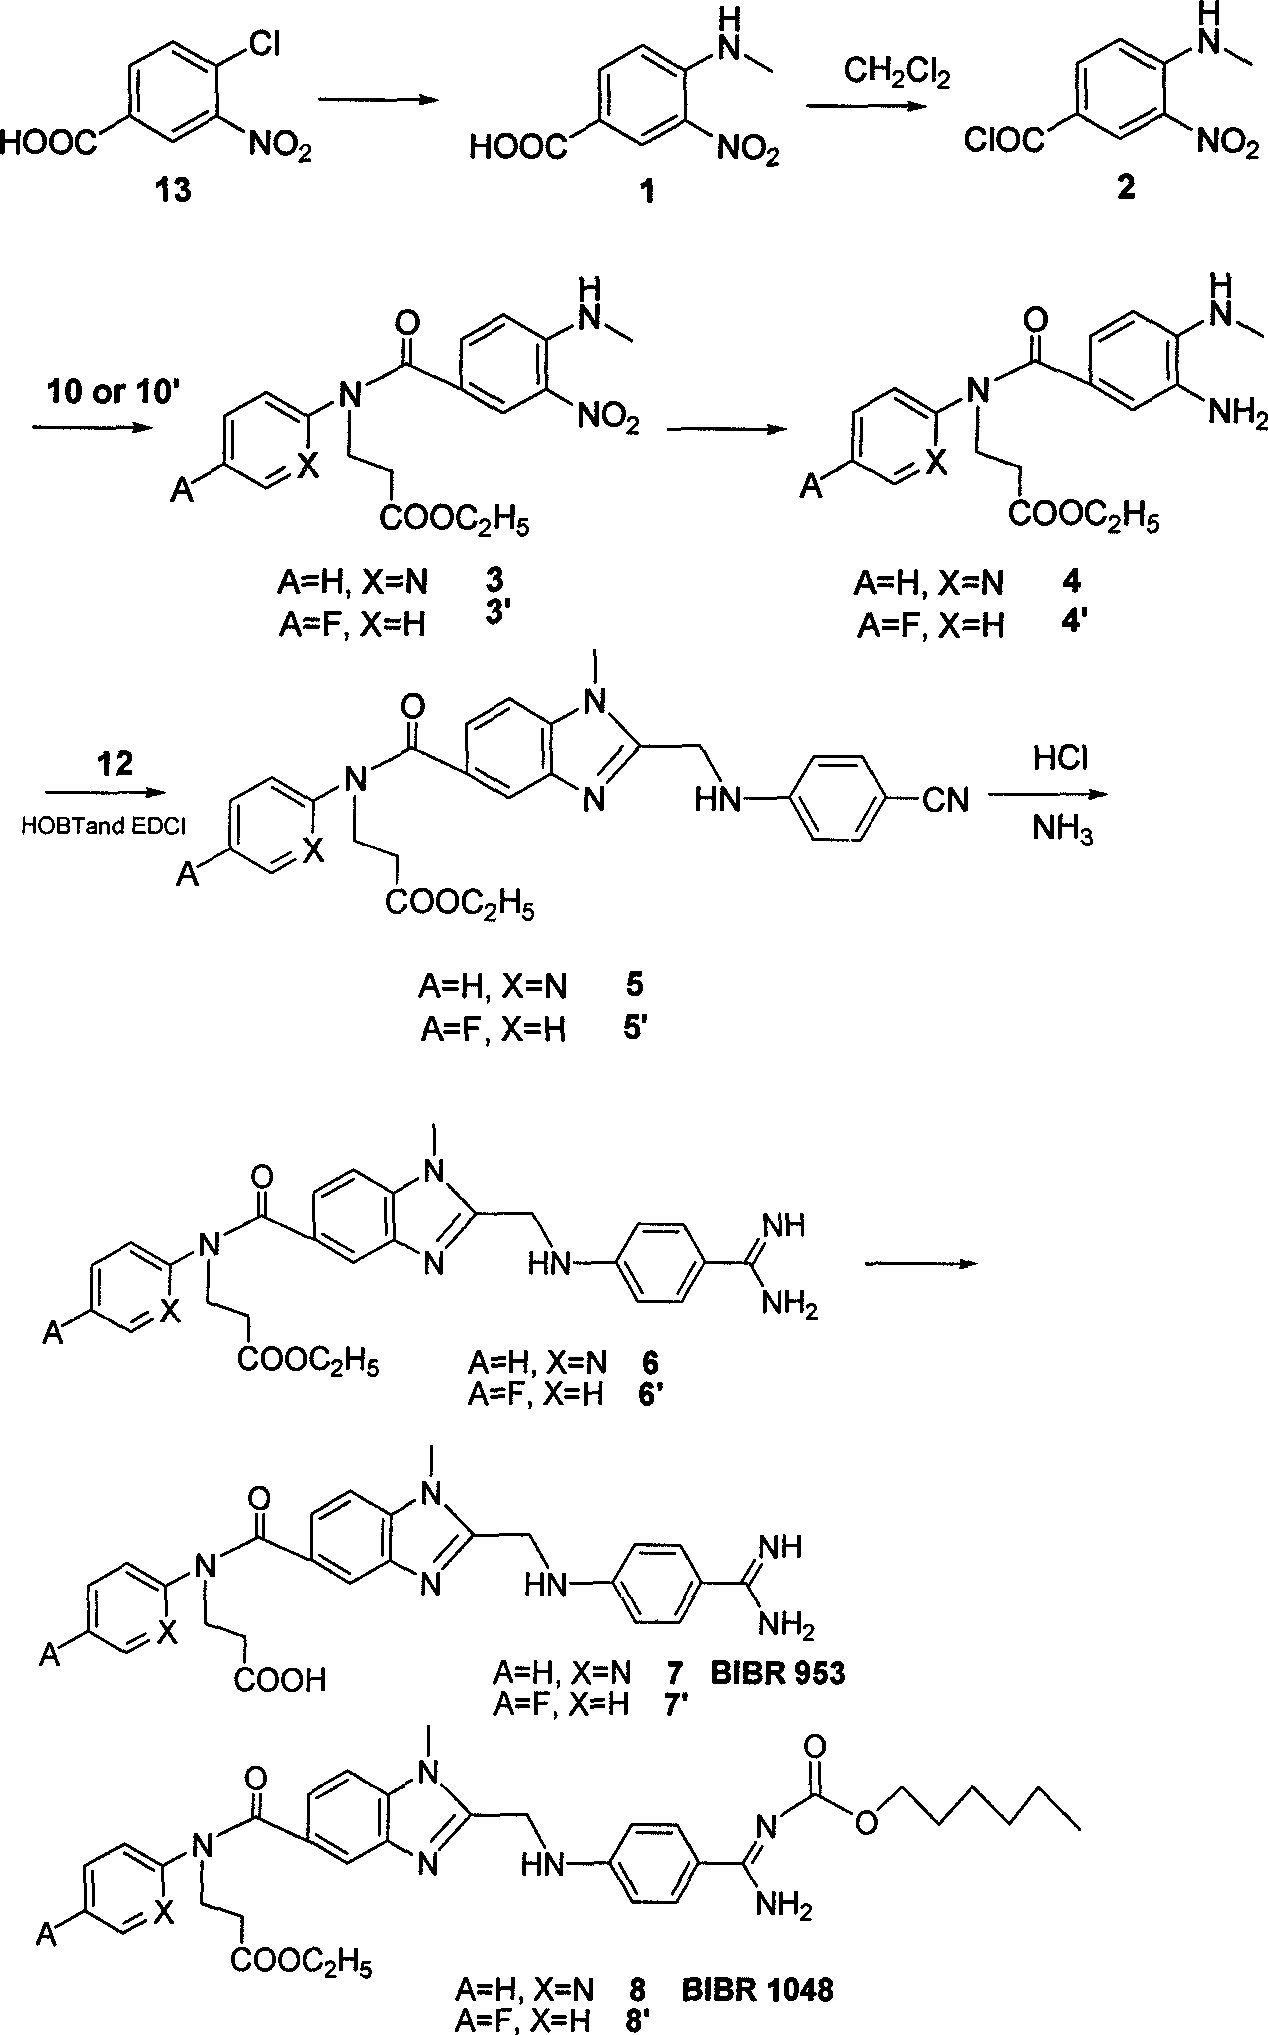 Process for synthesizing antithrombin inhibitor of non-asymmetric non-peptide kind